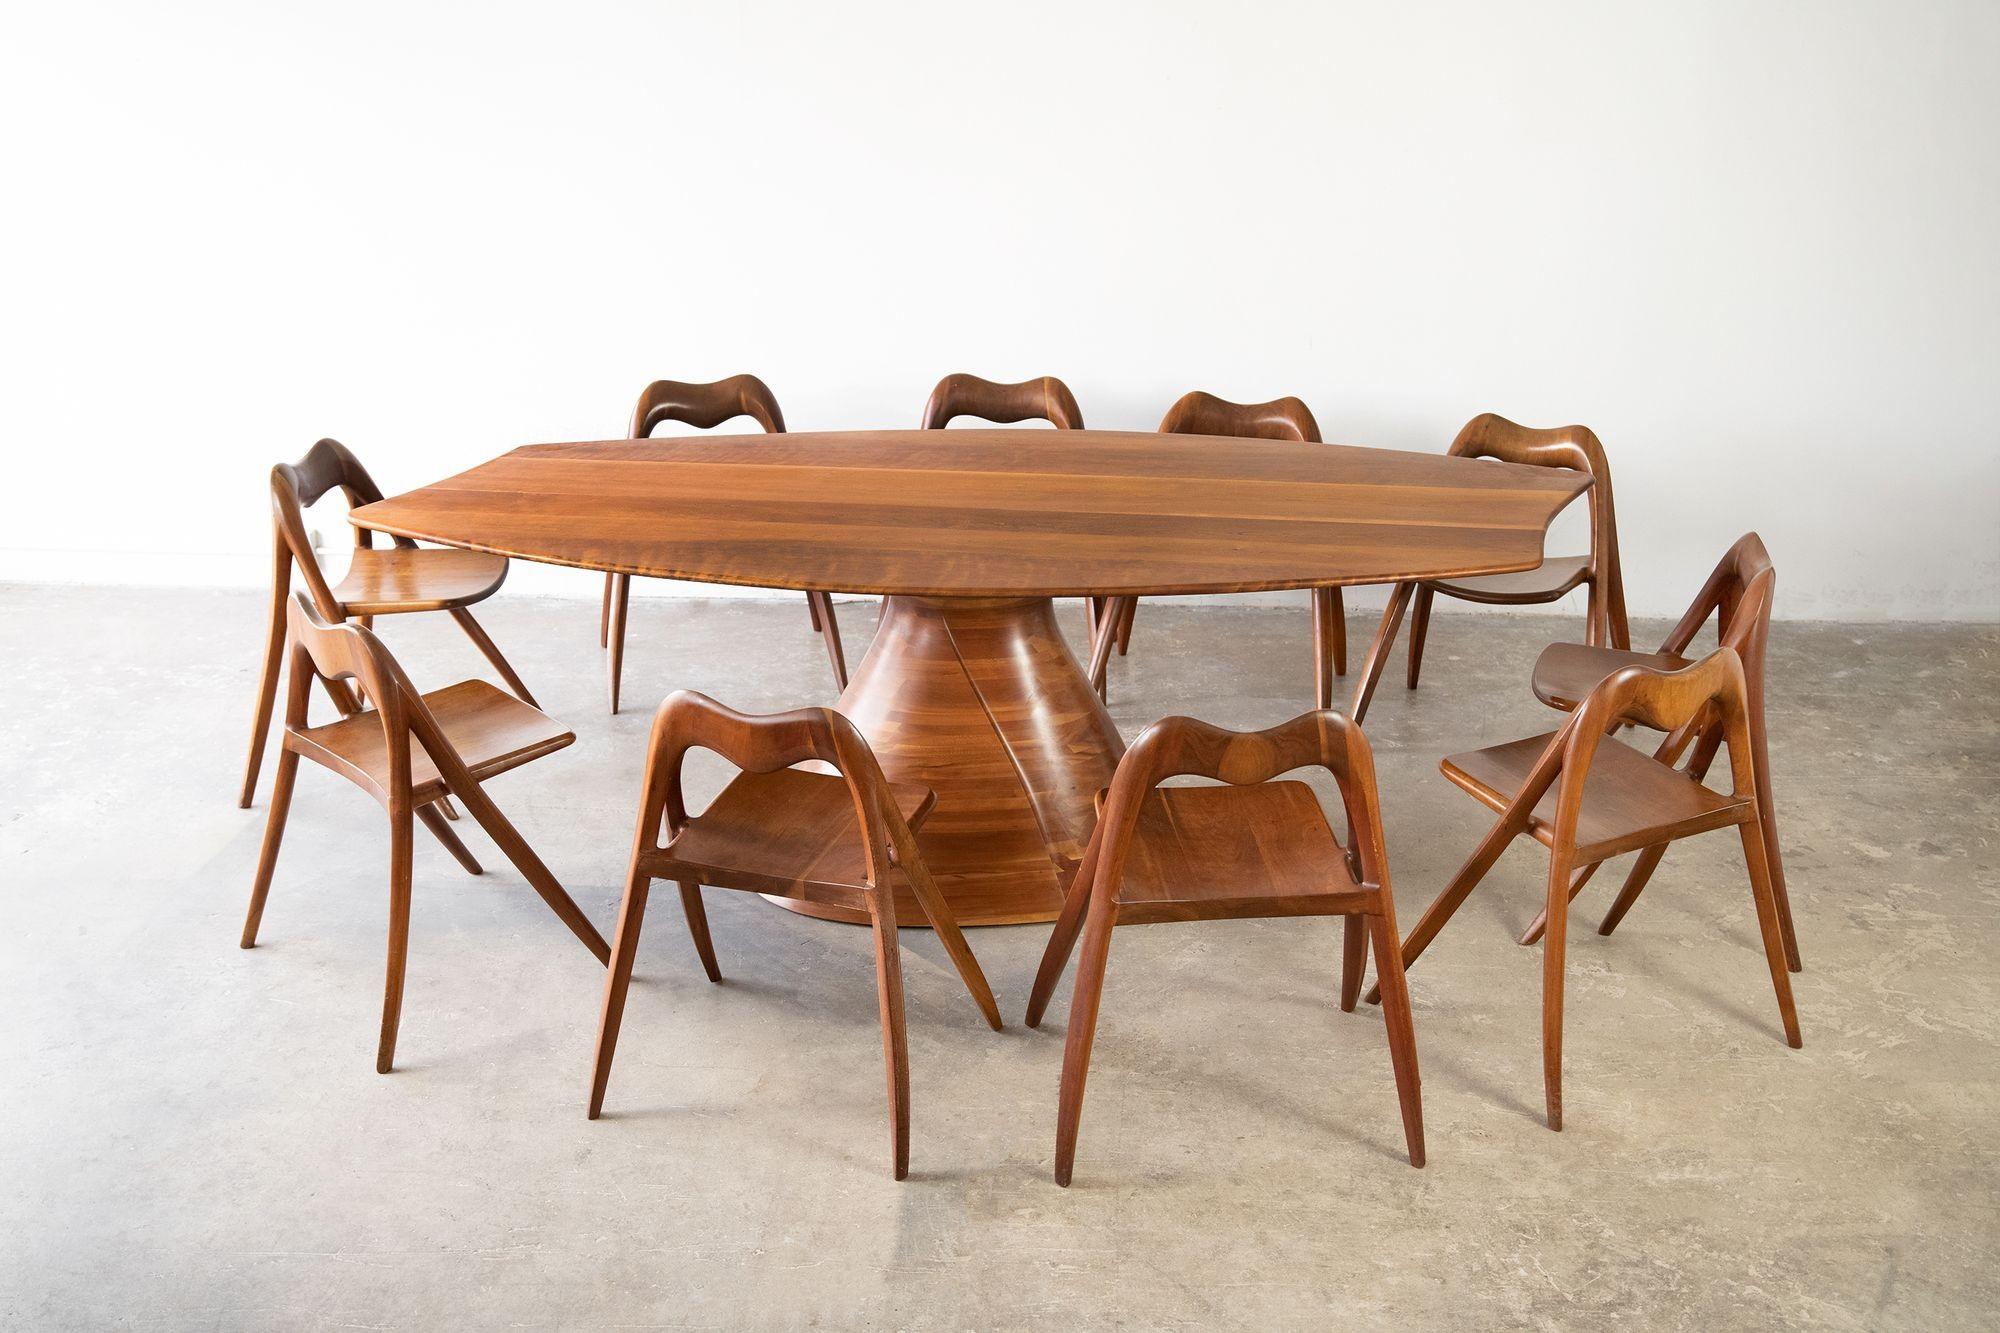 Claude Terrell Magnum Opus Dining Set 1970s Organic Studio Crafted Modernism For Sale 5